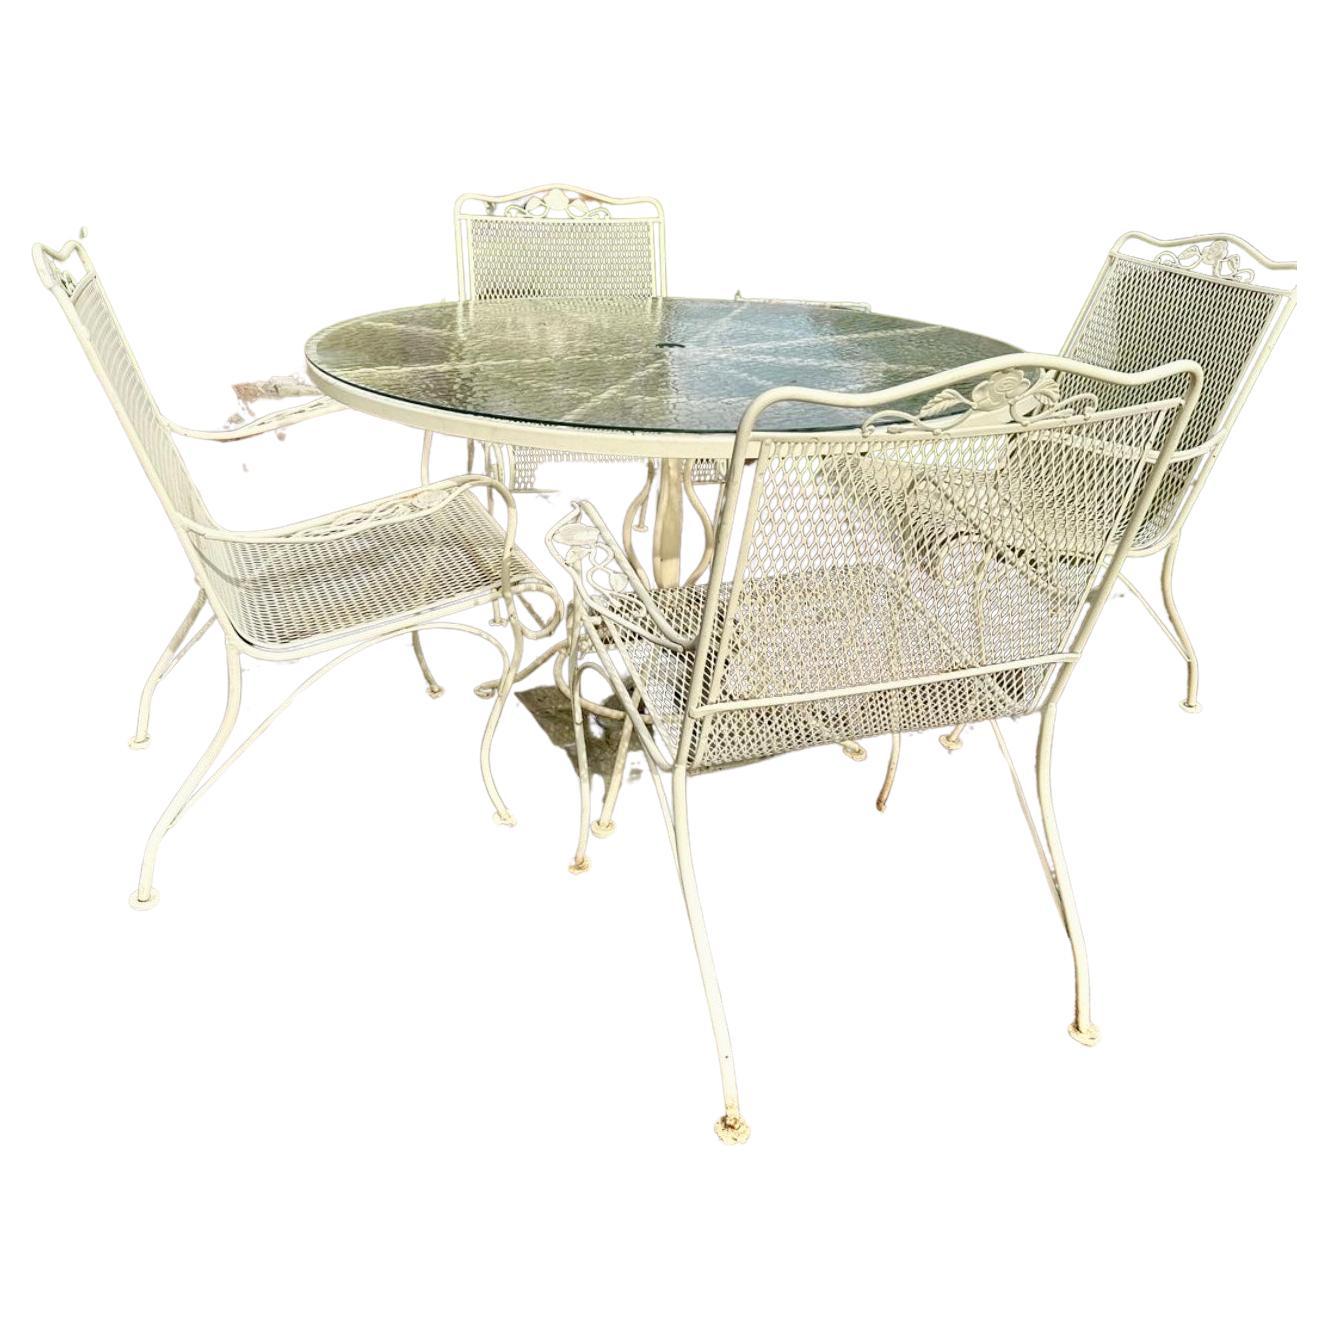 Patio Set by Woodard, Salterini Collection, 48" D. table and 4 dining armchairs